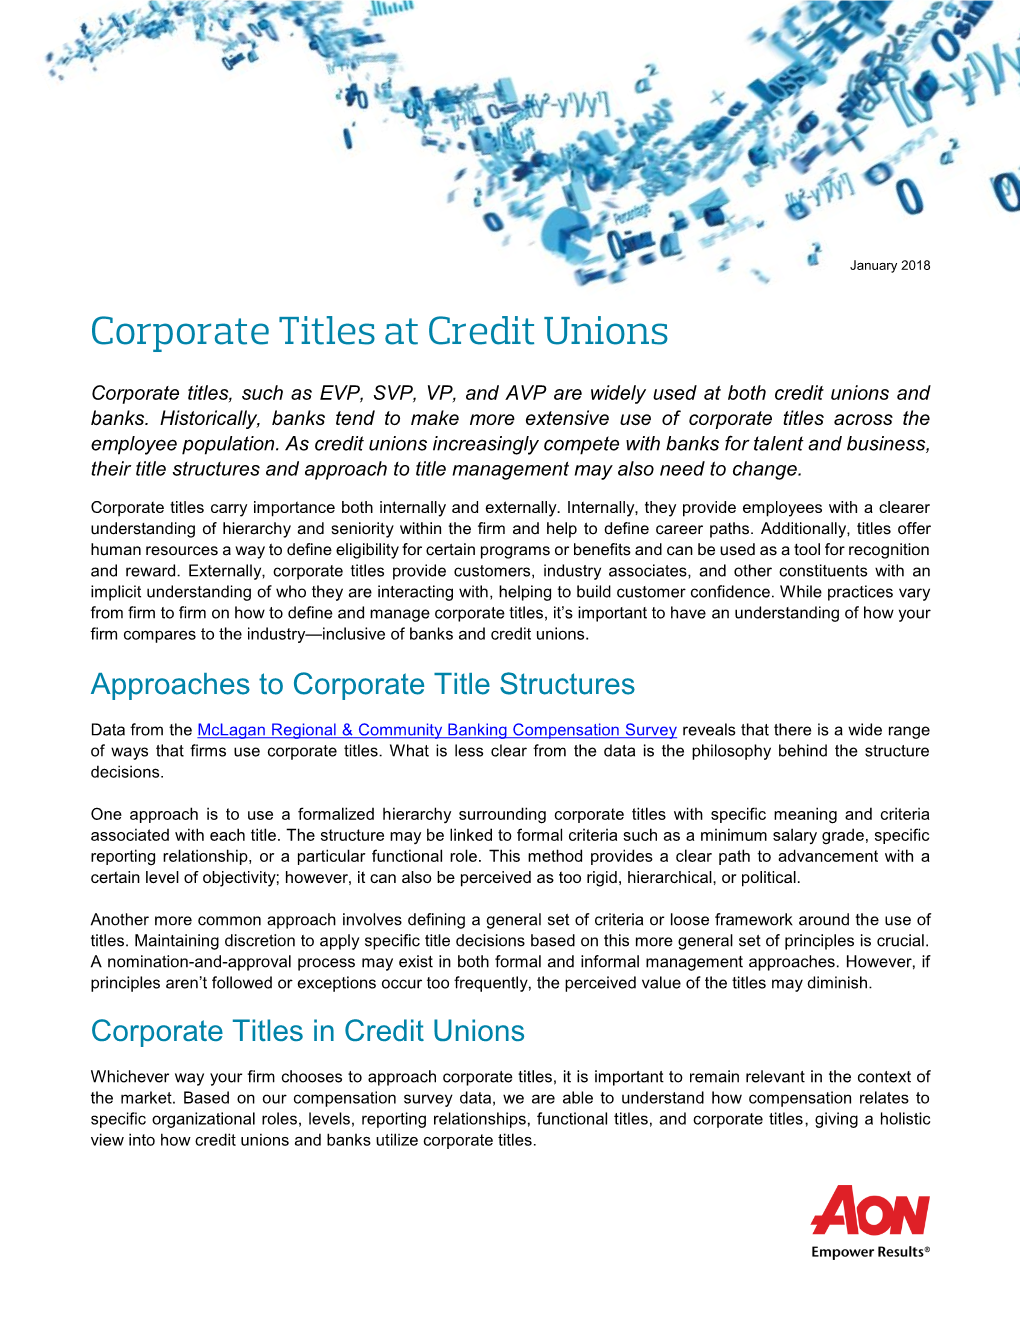 Approaches to Corporate Title Structures Corporate Titles in Credit